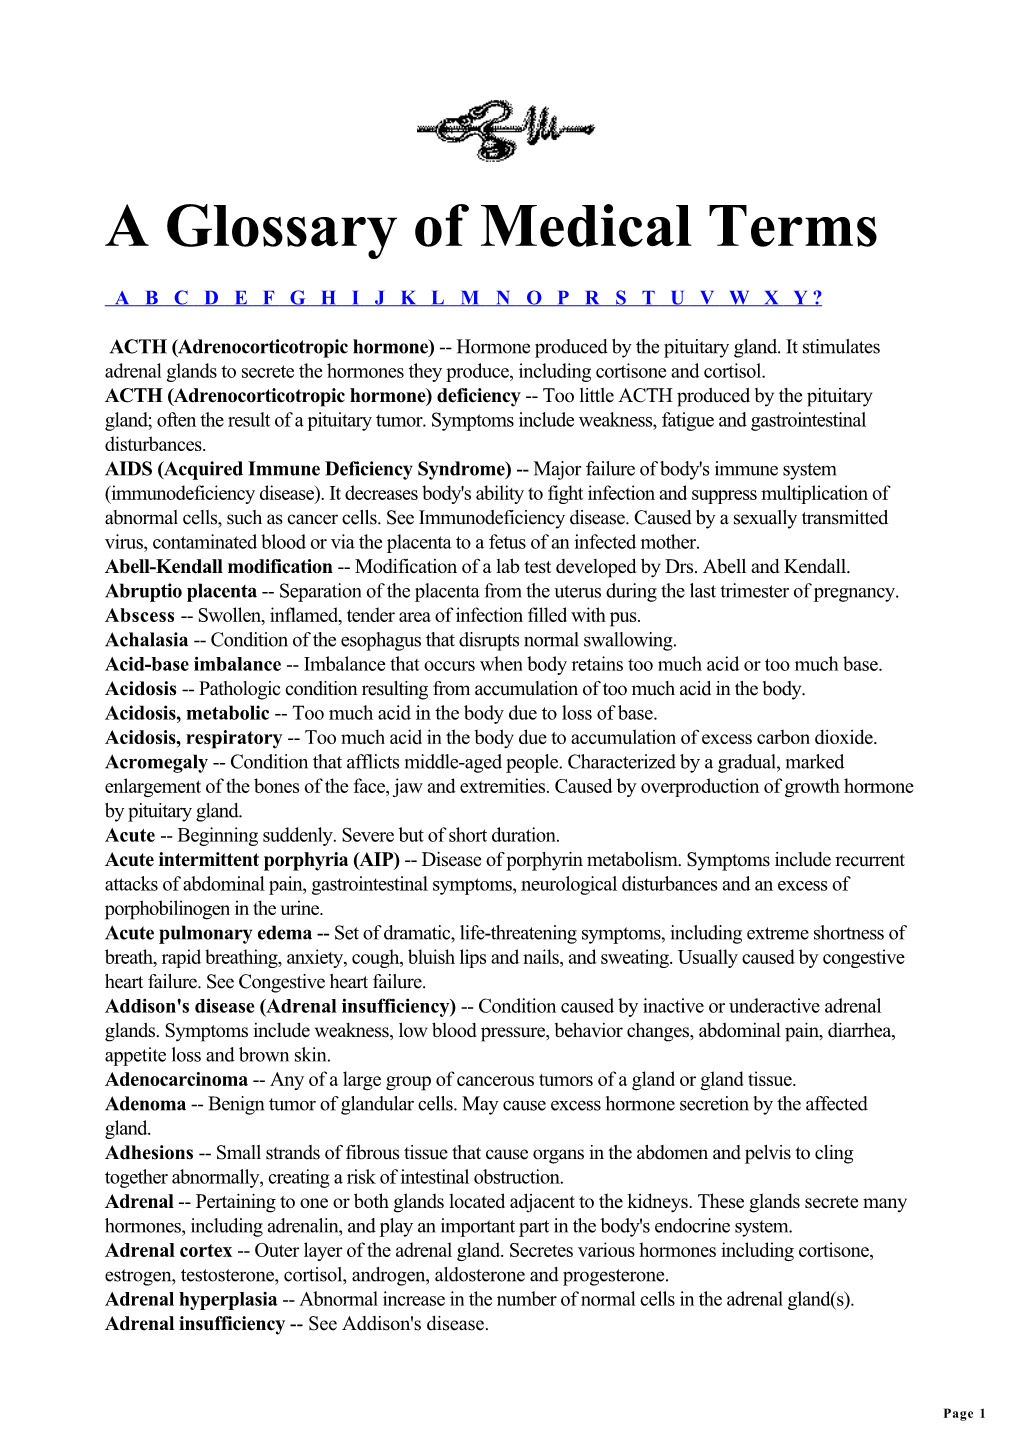 A Glossary of Medical Terms